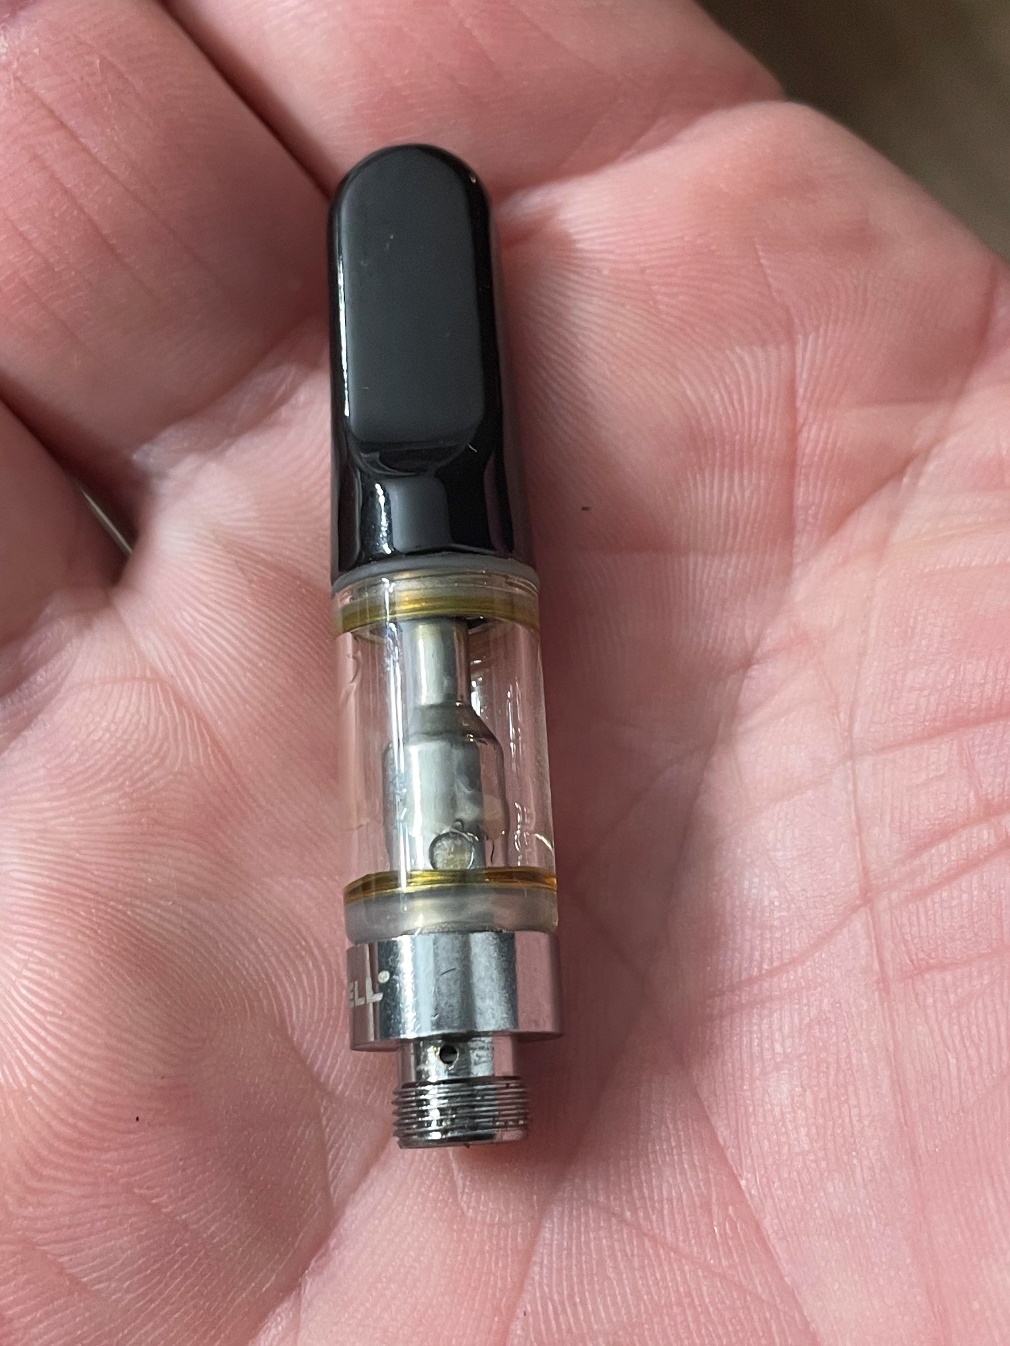 At what point do you toss a cart? Fairly new to vaping. I still get some  effects when it's this low, but it's more of a burnt taste and it clogs more